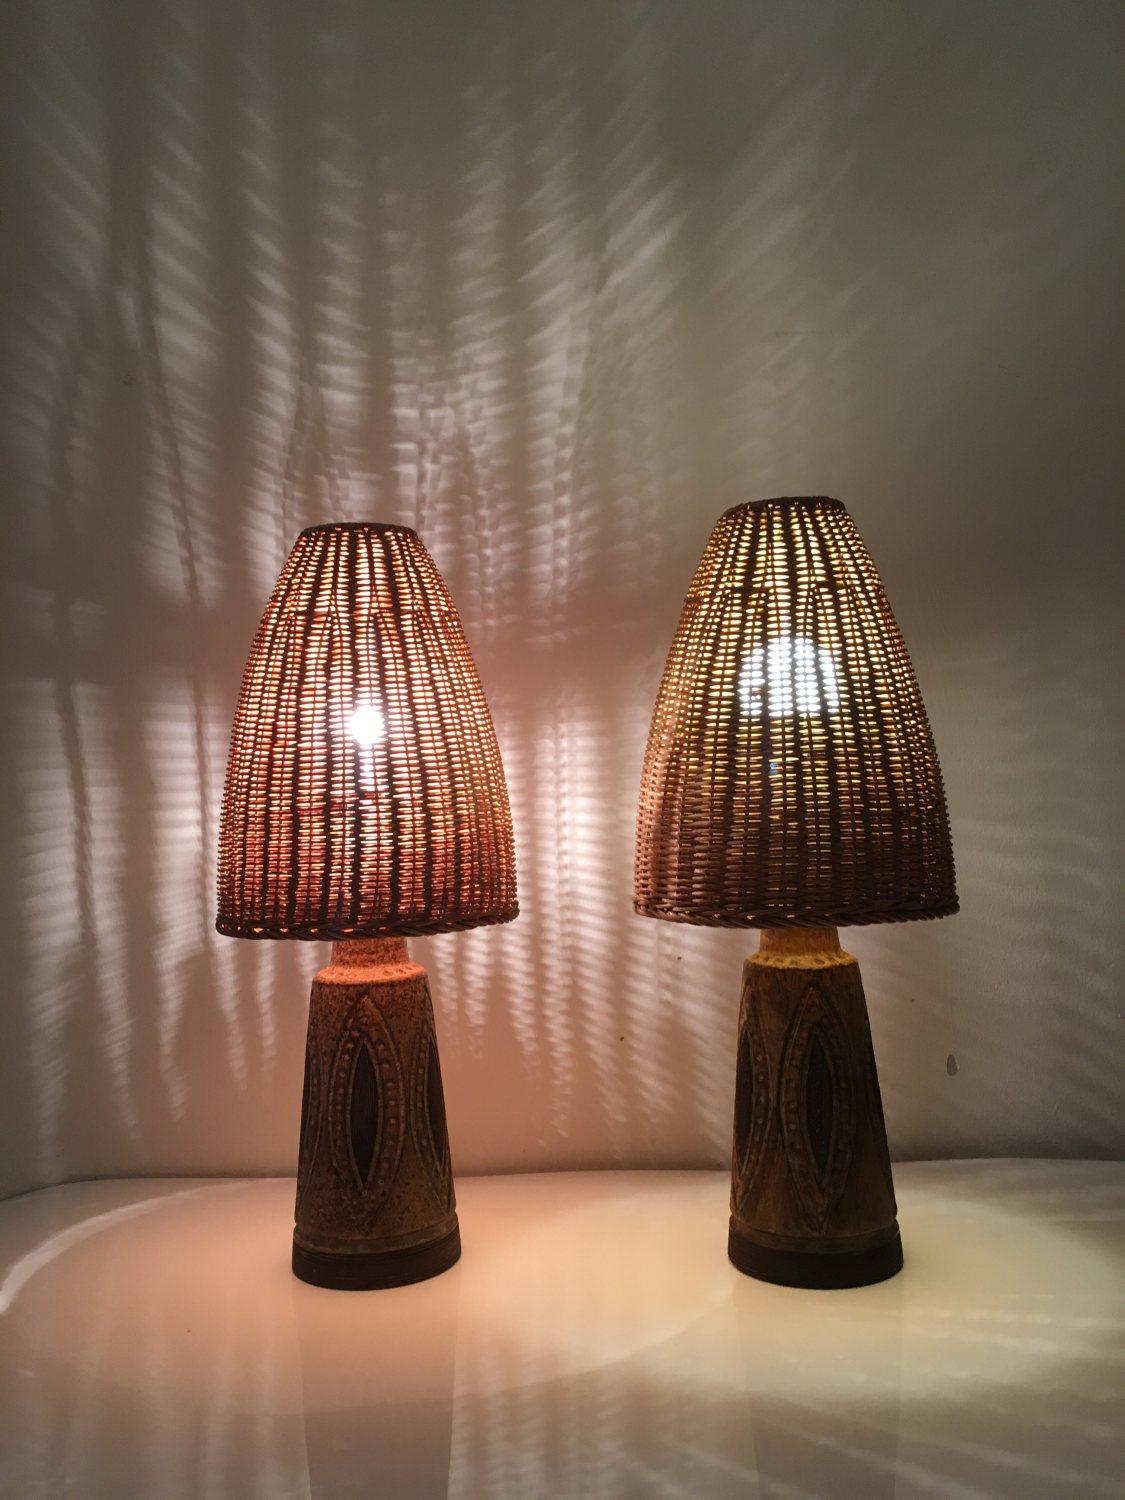 Pair of special ceramic table lamps, with original wicker lamp shade from Denmark 1970s. The body of this pair of table lamps is brown and black glazed ceramic with vintage shapes engraved on it. The lampshade is an original woven rattan shade in